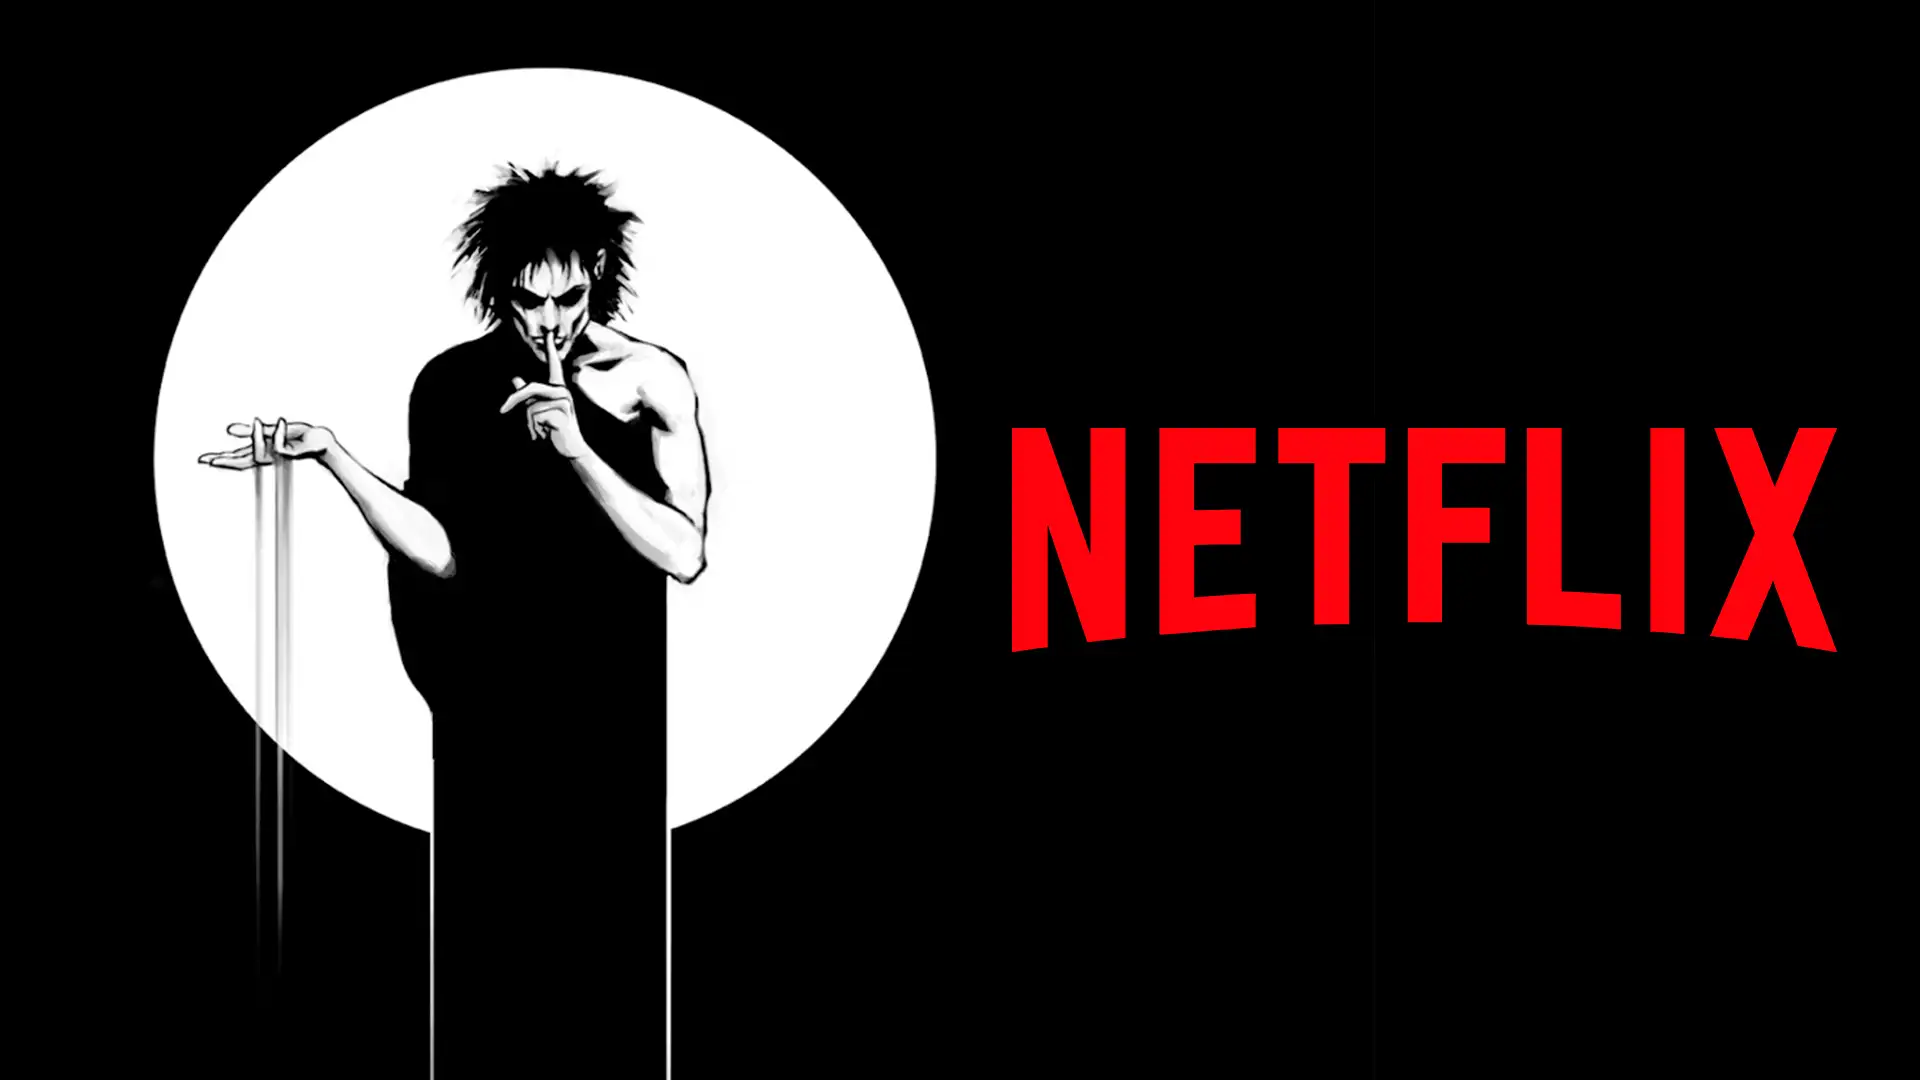 Netflix August 2022 Lineup – The Sandman, Locke and Key and More